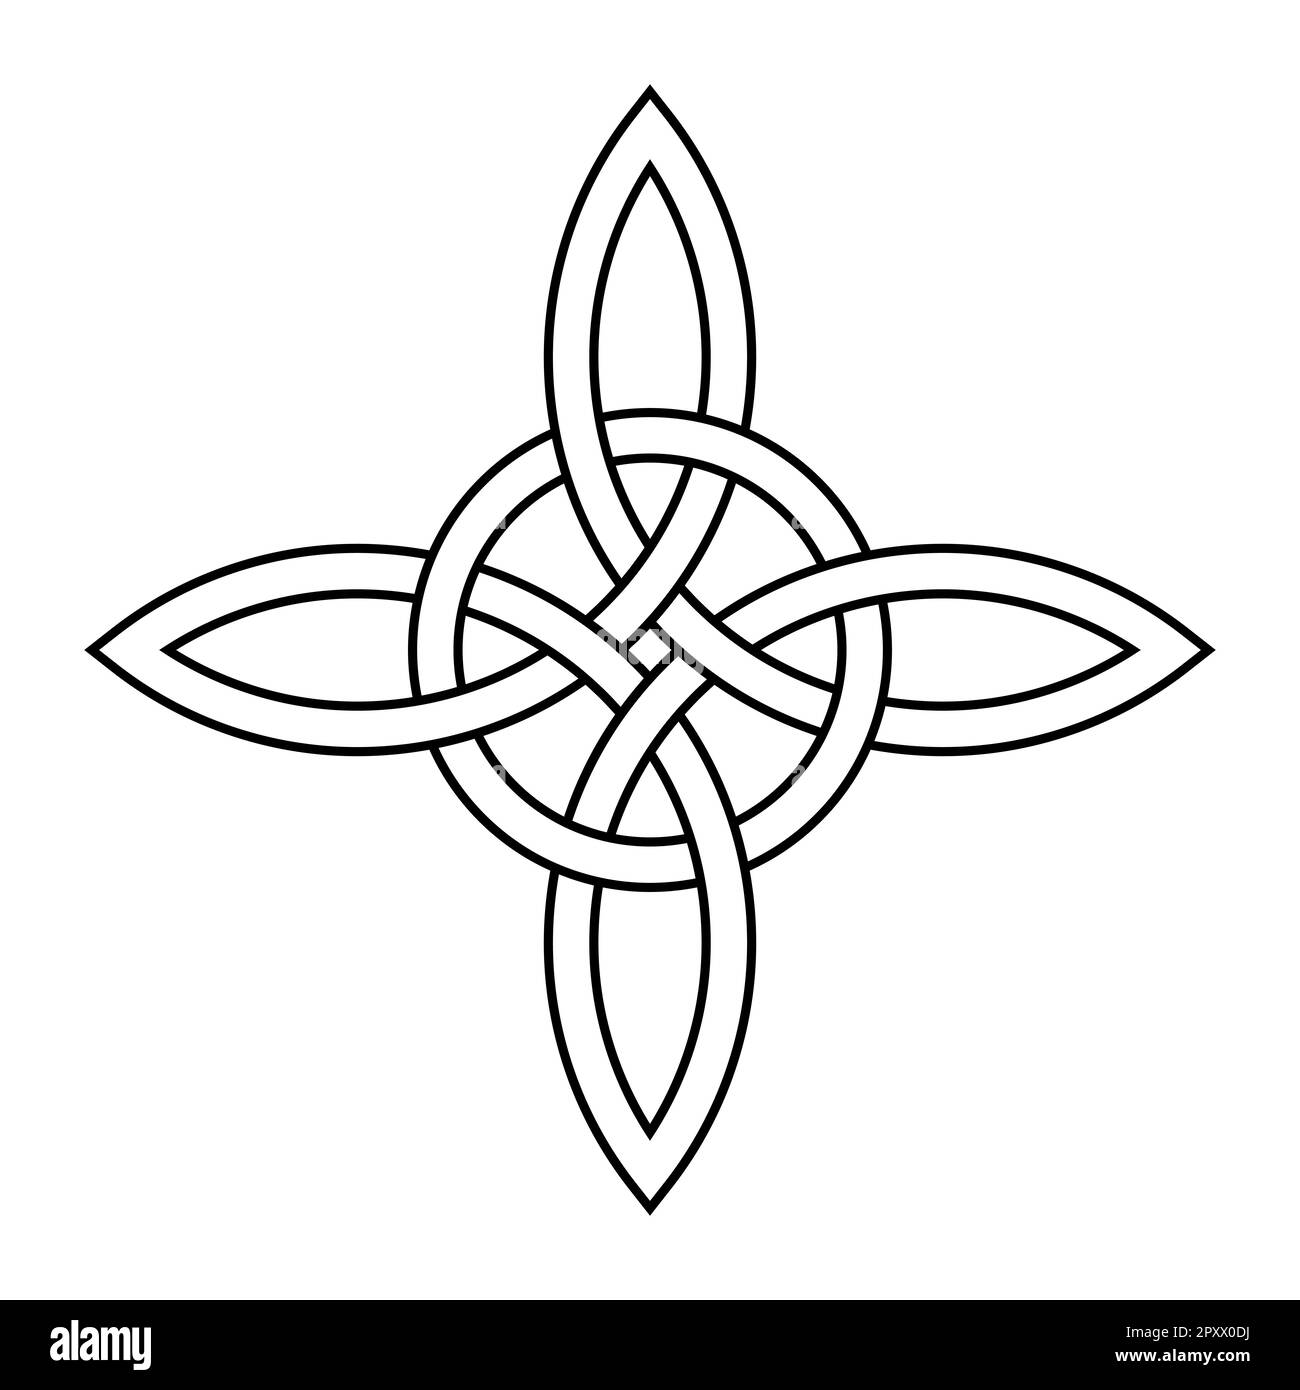 Celtic quad knot with interlaced circle. Celtic cross, formed by four endless connected arcs, intertwined with a circle. Stock Photo